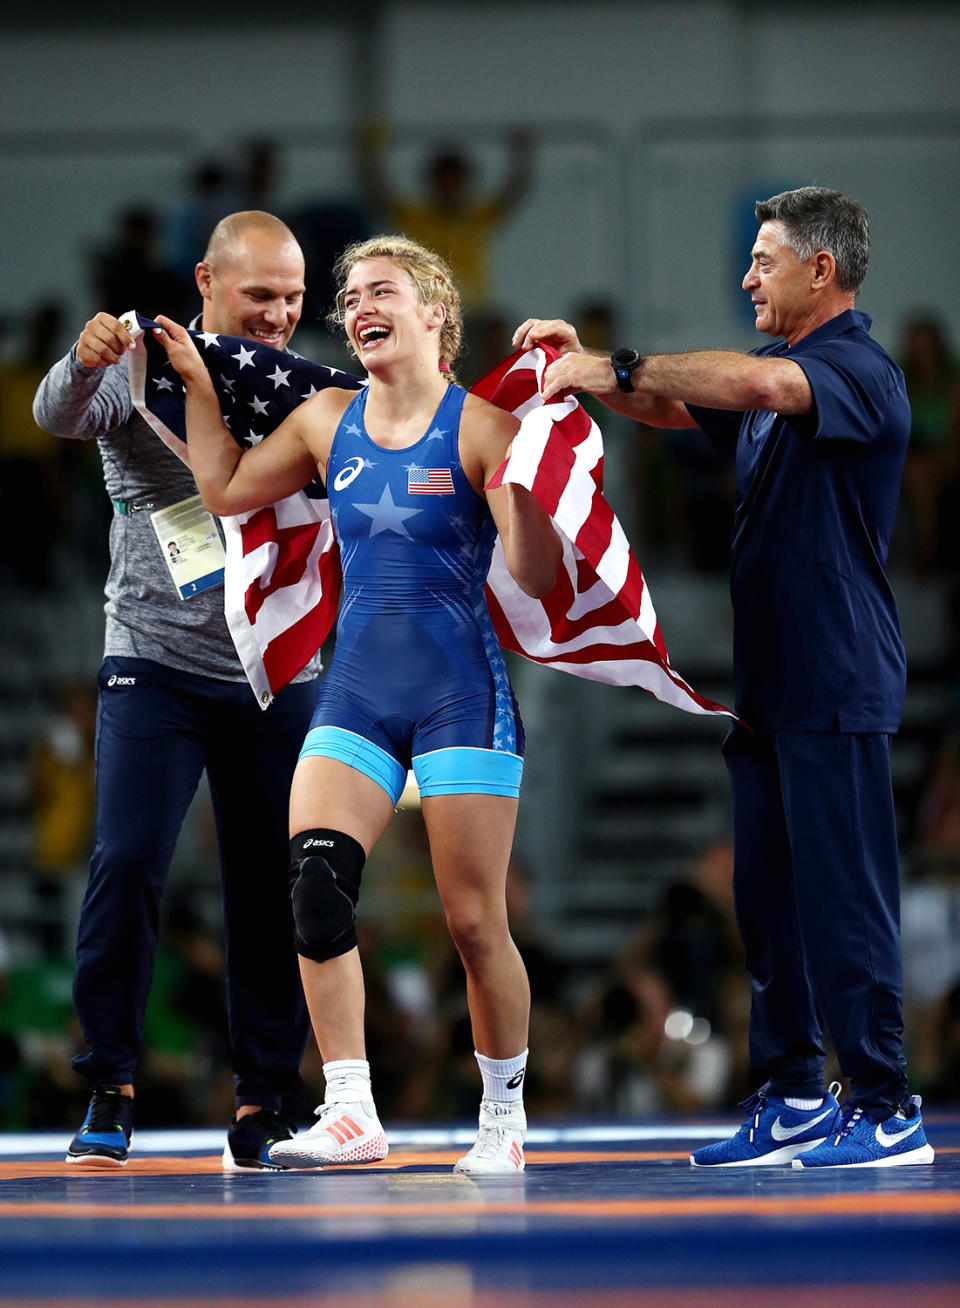 <p>Girls wear singlets, too. Helen Maroulis won gold in wrestling, the first time an American woman has done so. What's better than winning gold? Beating a three-time Olympic gold medalist and the most decorated female in the history of women's wrestling. This was Maroulis' first Olympics. (Photo by Julian Finney/Getty Images) </p>